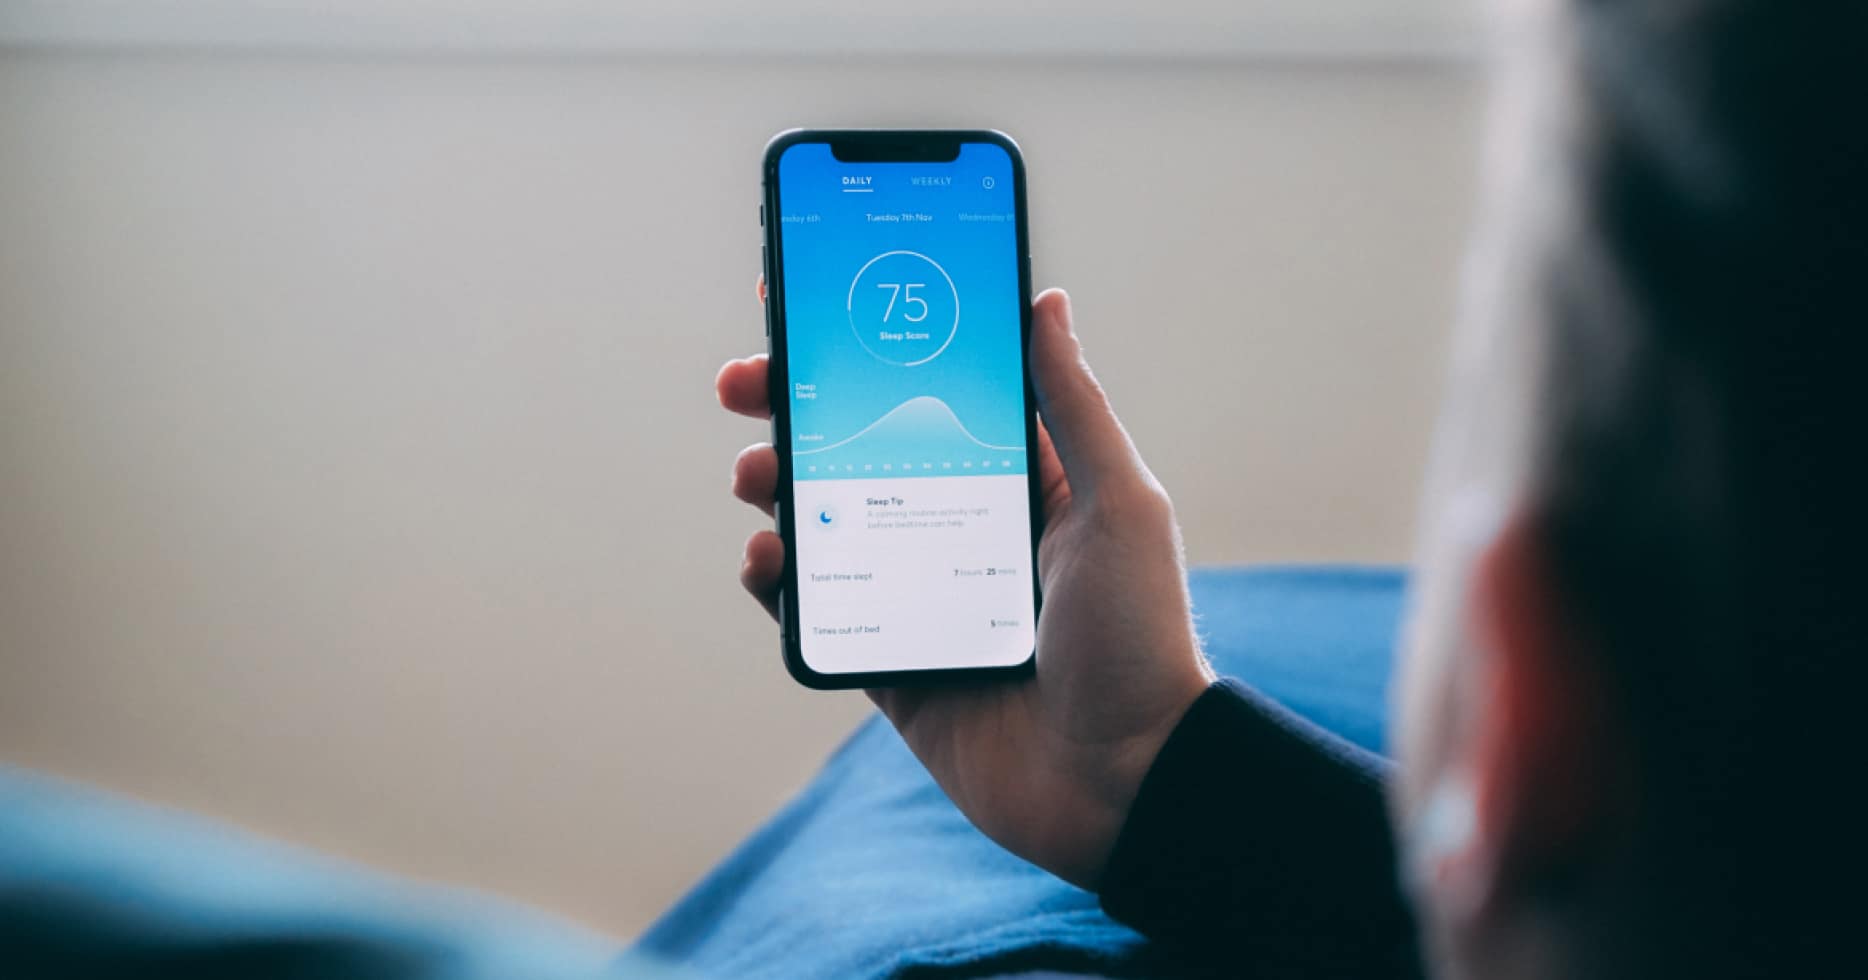 Man holding phone with sleep tracker showing